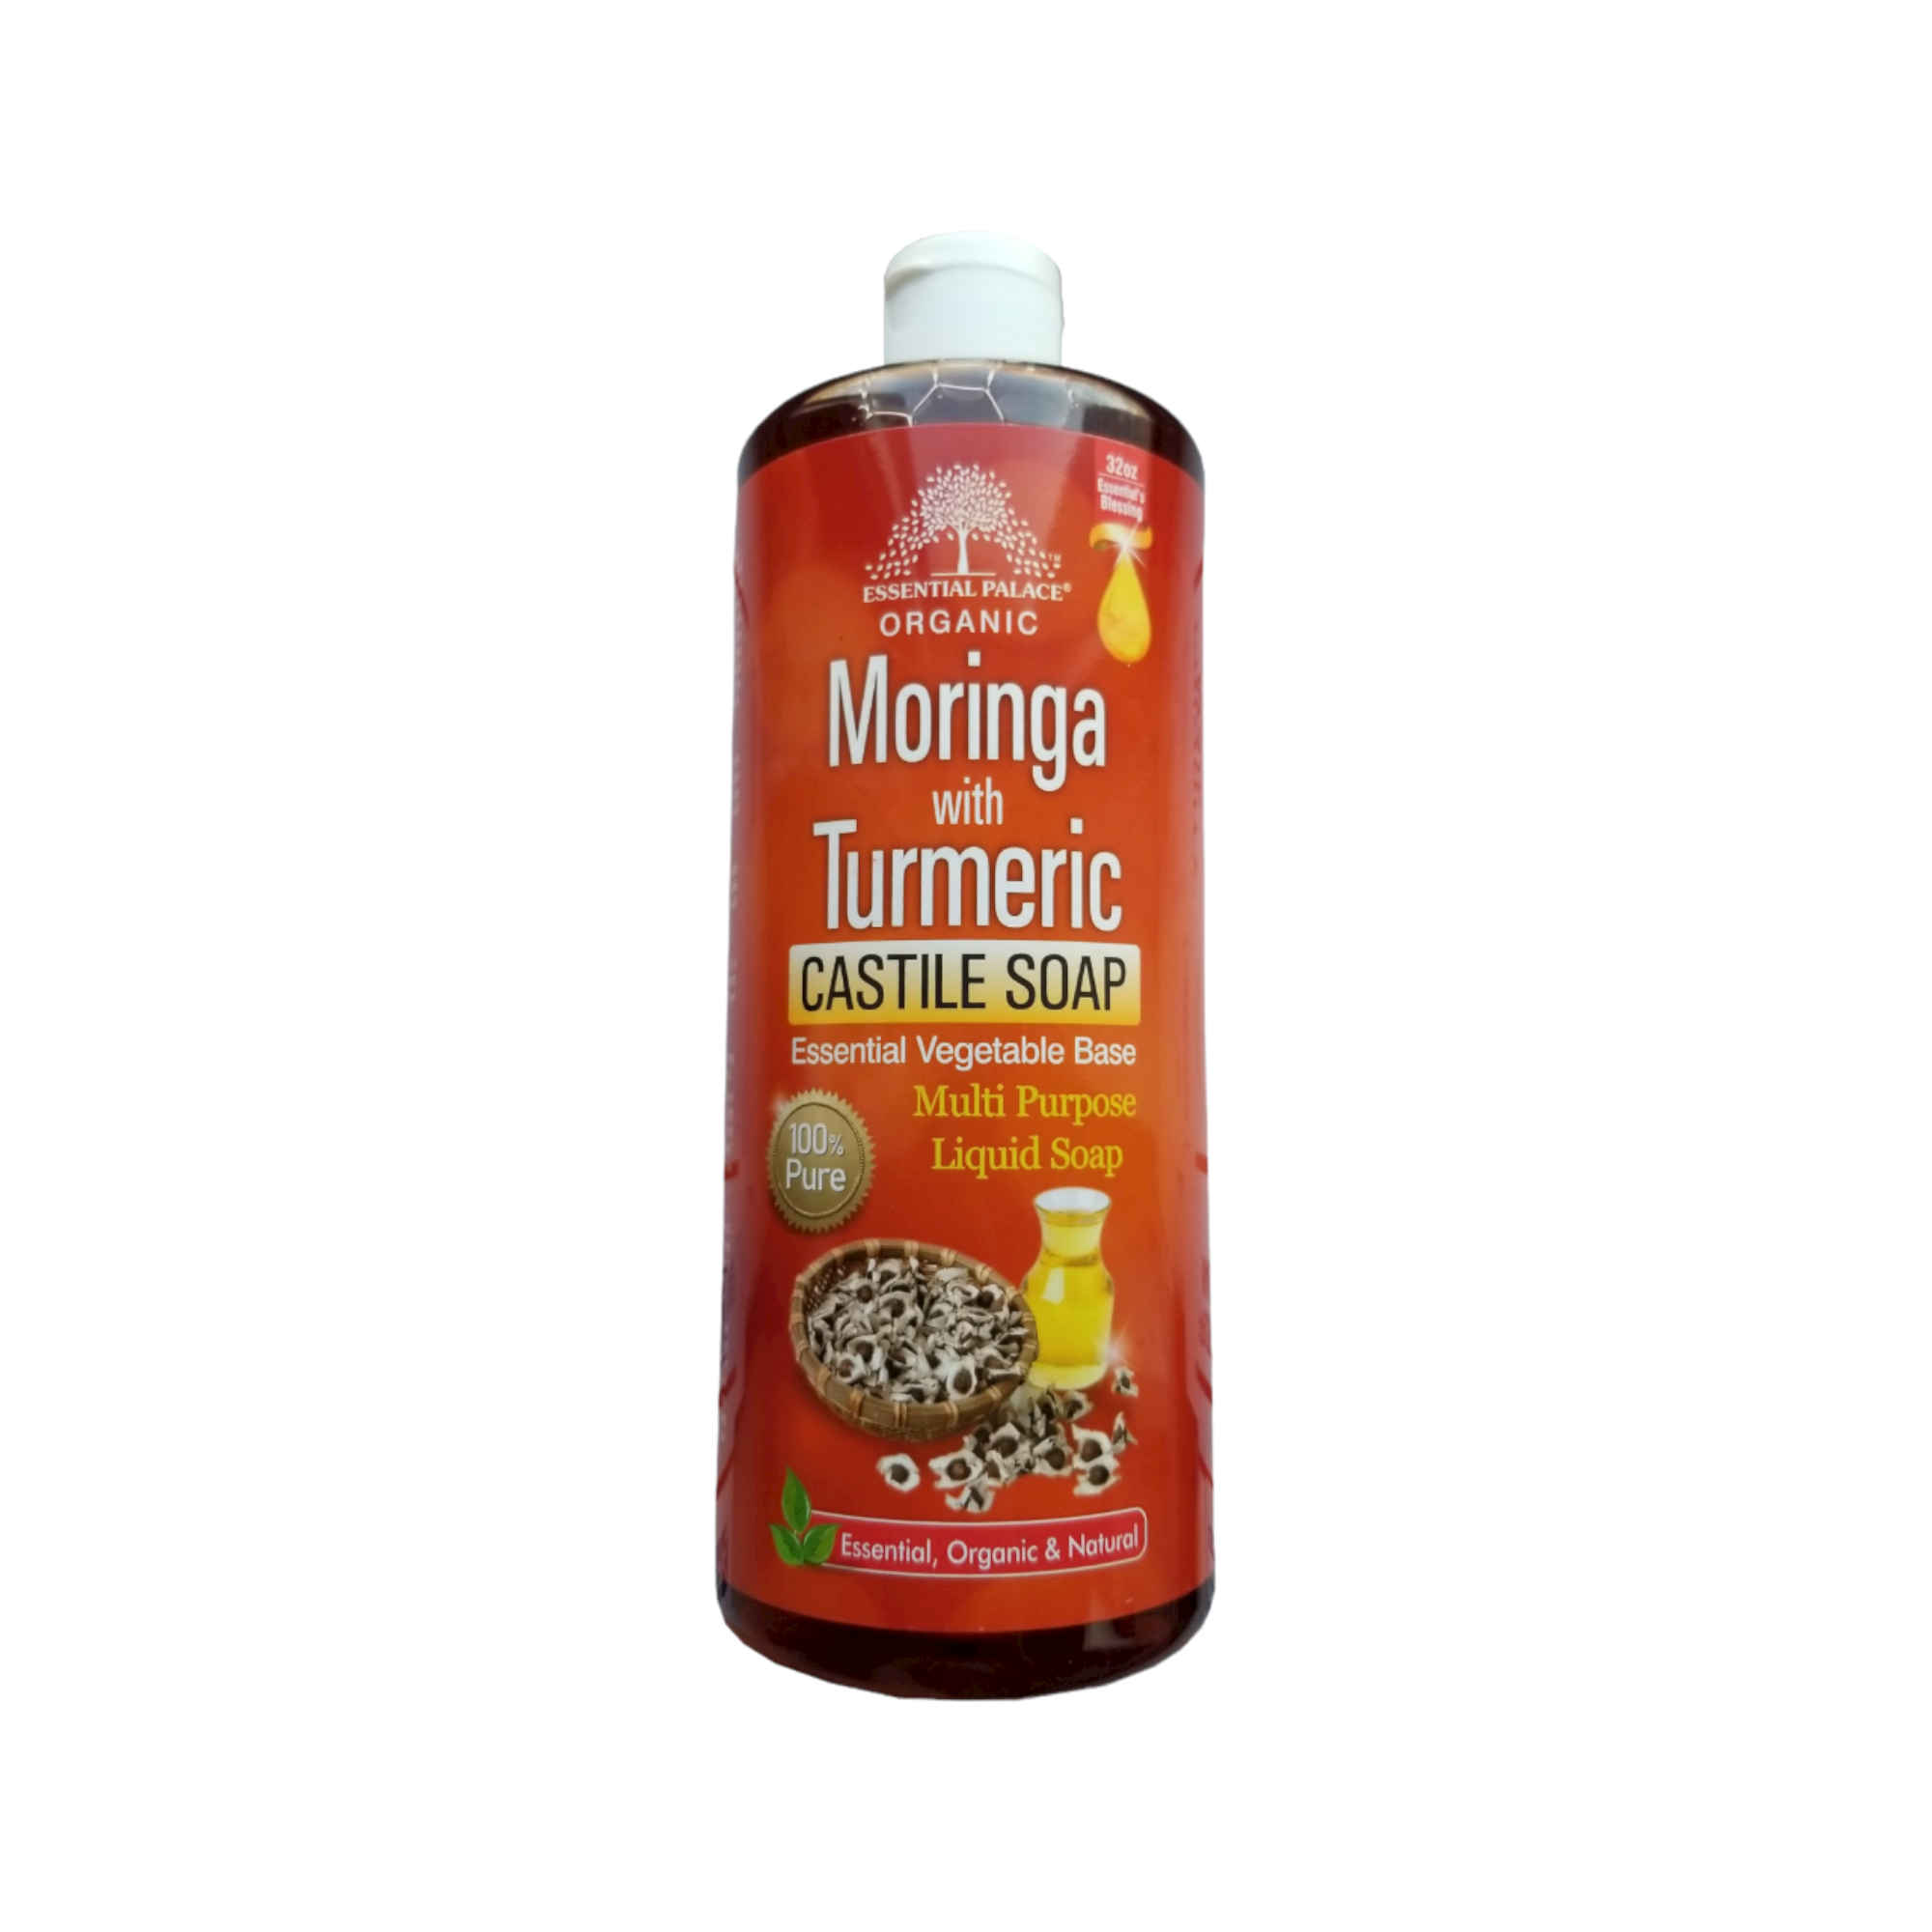 Essential Palace Moringa with Turmeric Castile Soap 32 OZ Front